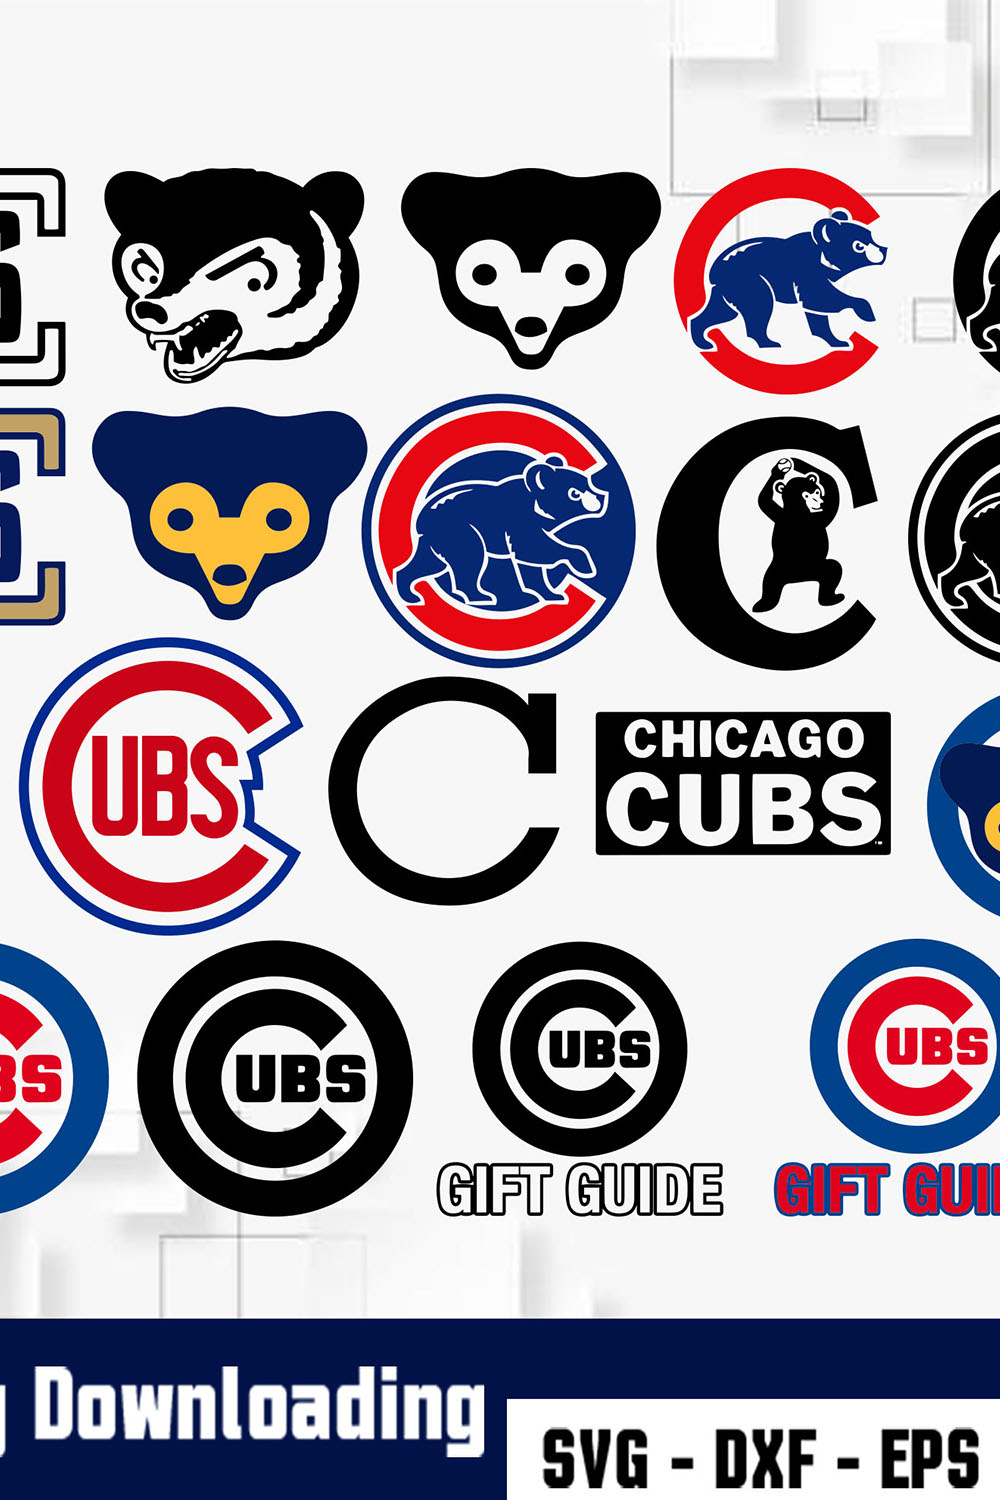 Chicago Cubs Retro Logo Can Koozie Holder Free Shipping! NEW